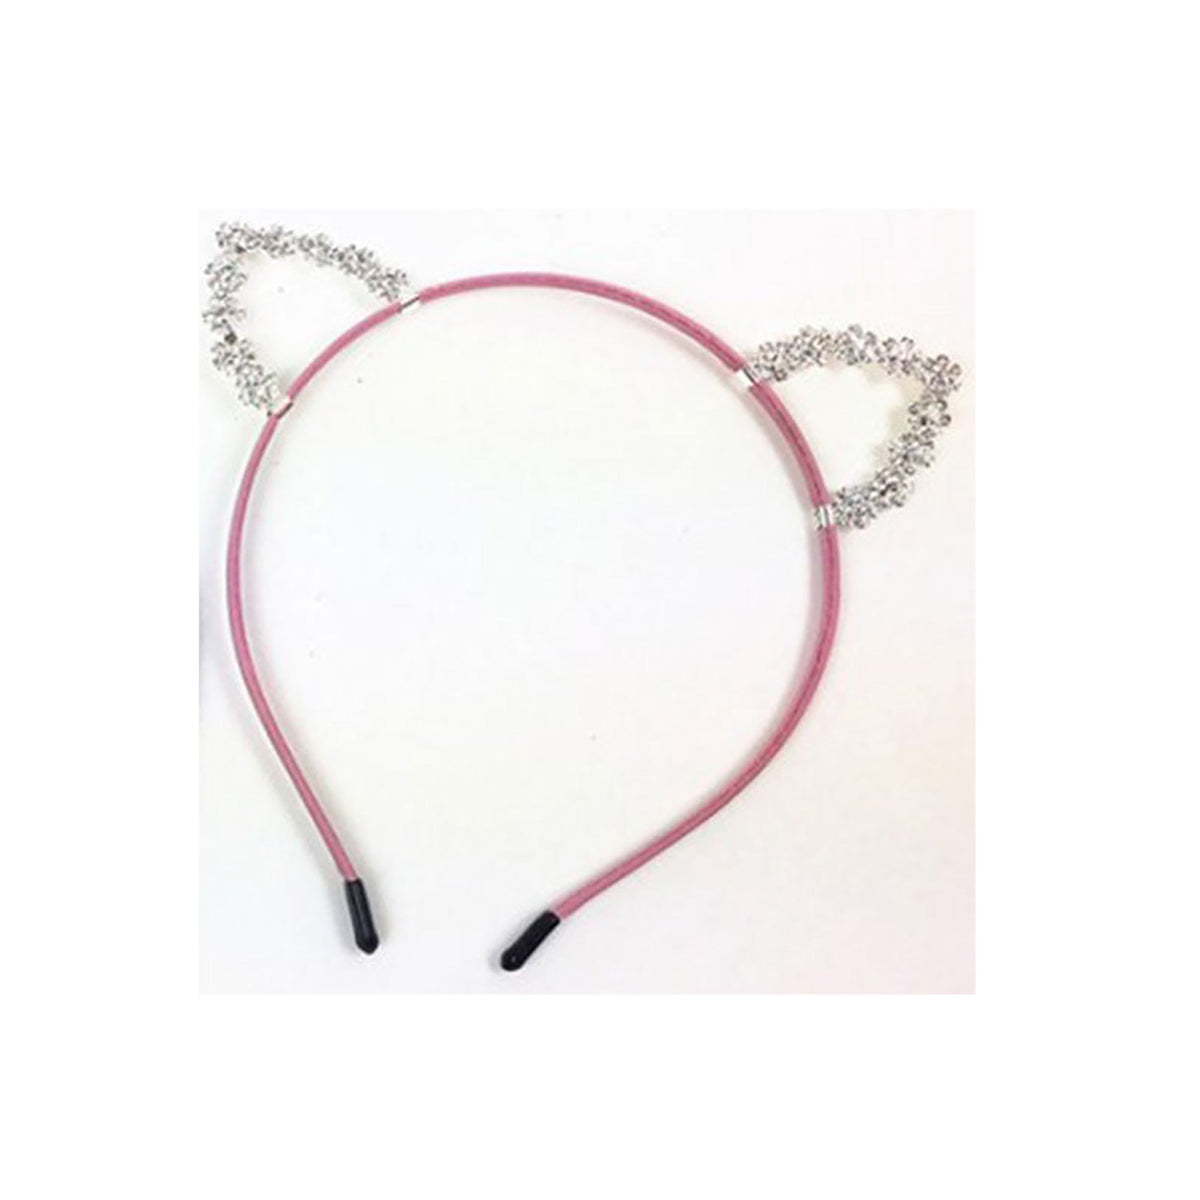 IVY TRADING INC. Costume Accessories Pink Crystal Cat Headband 8336572031459